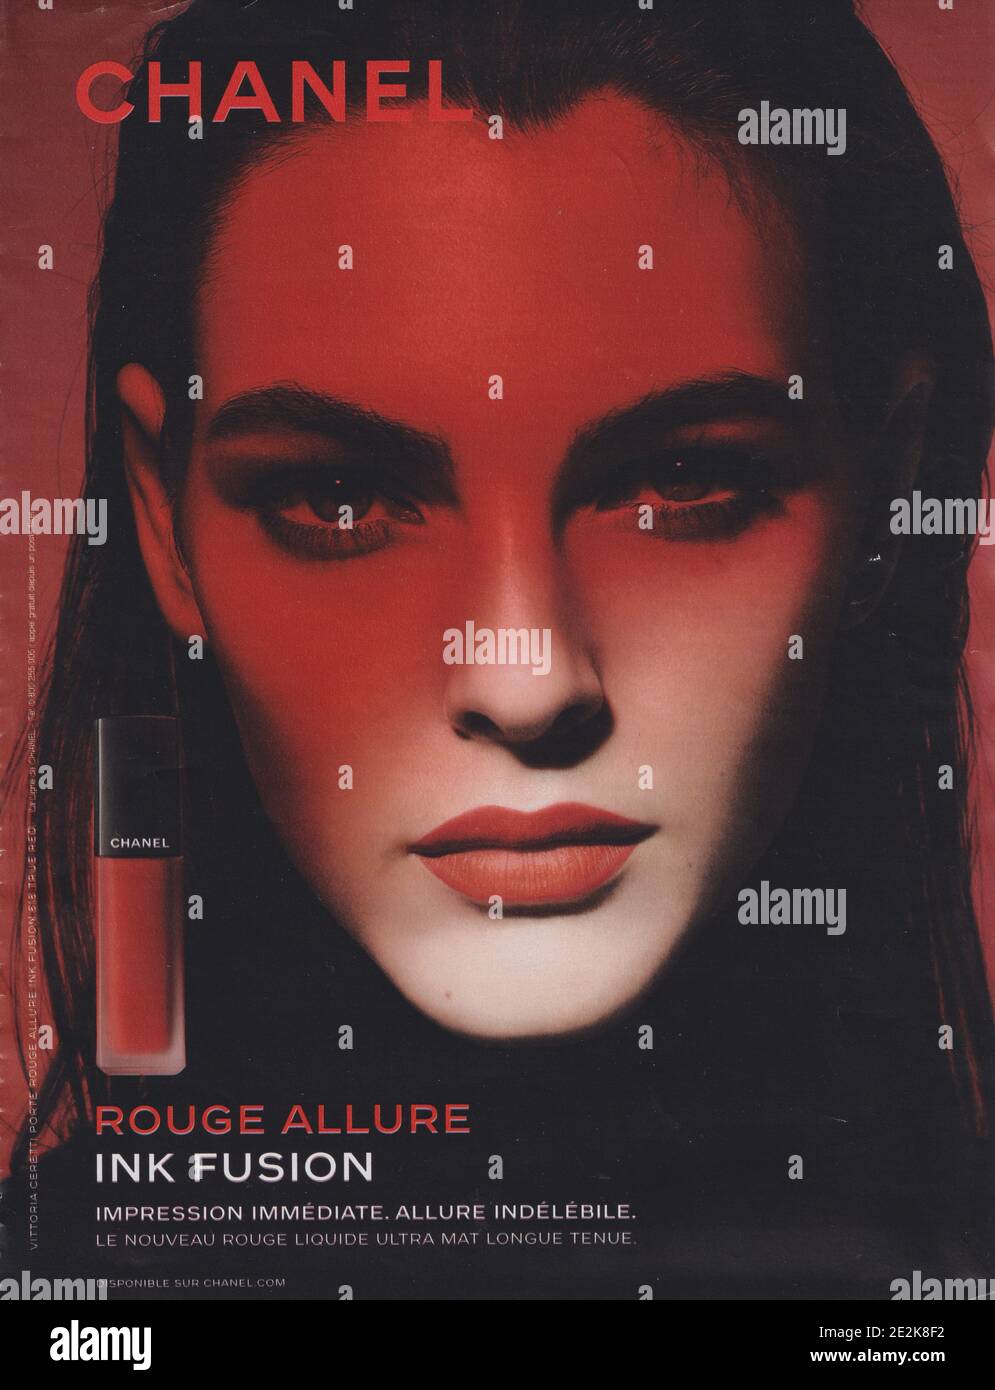 poster advertising CHANEL cosmetics with Vittoria Ceretti in paper magazine  from 2019 year, advertisement, creative CHANEL advert from 2010s Stock  Photo - Alamy